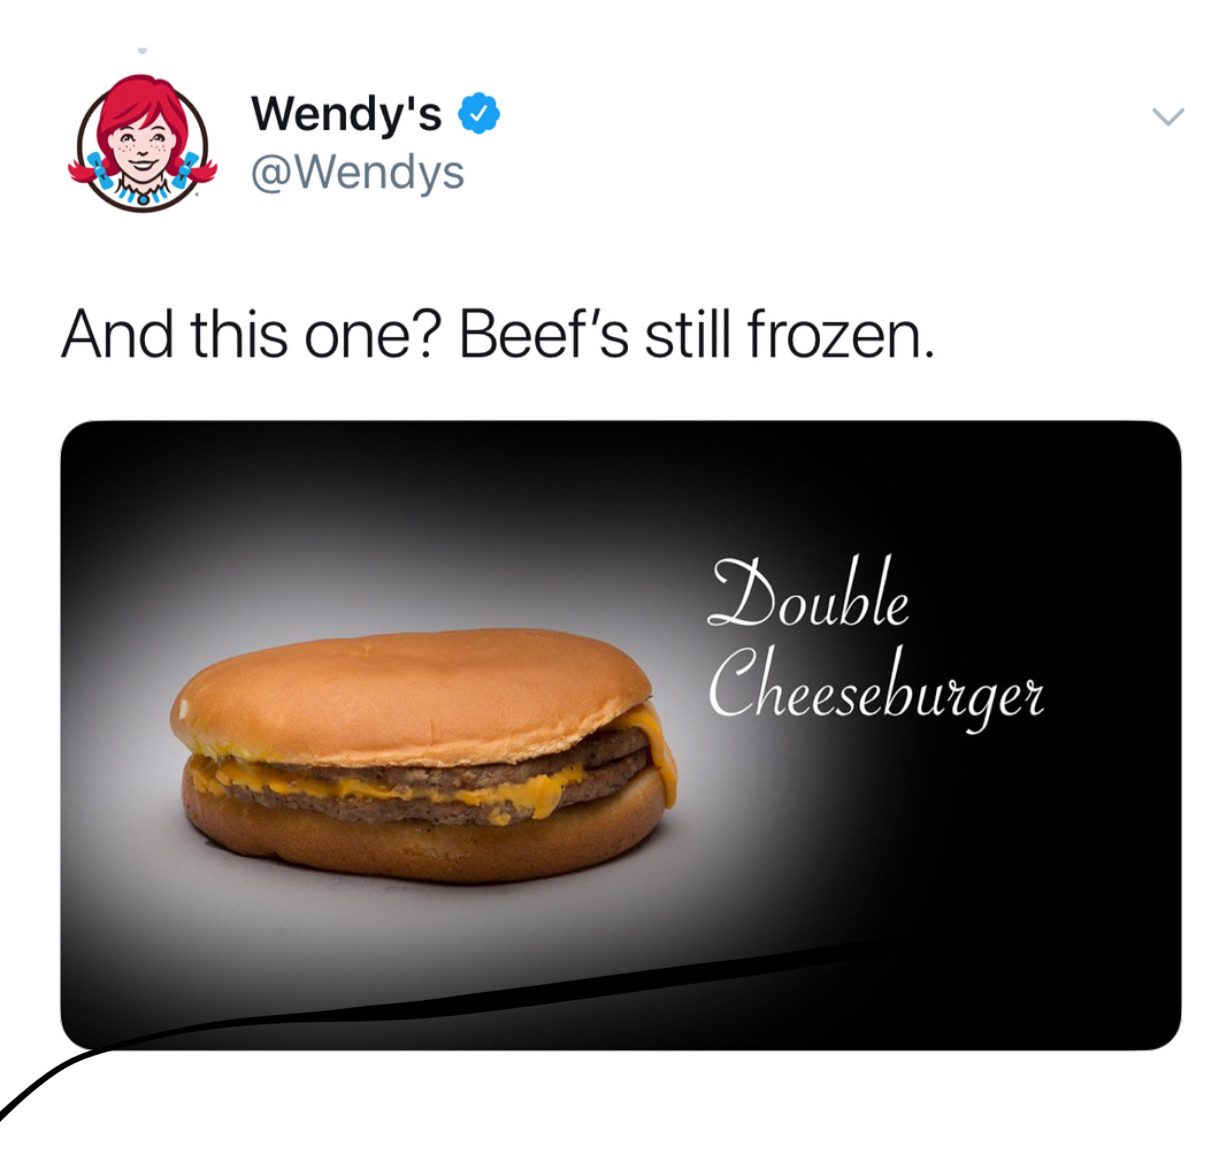 wendy's twitter - Wendy's And this one? Beef's still frozen. Double Cheeseburger